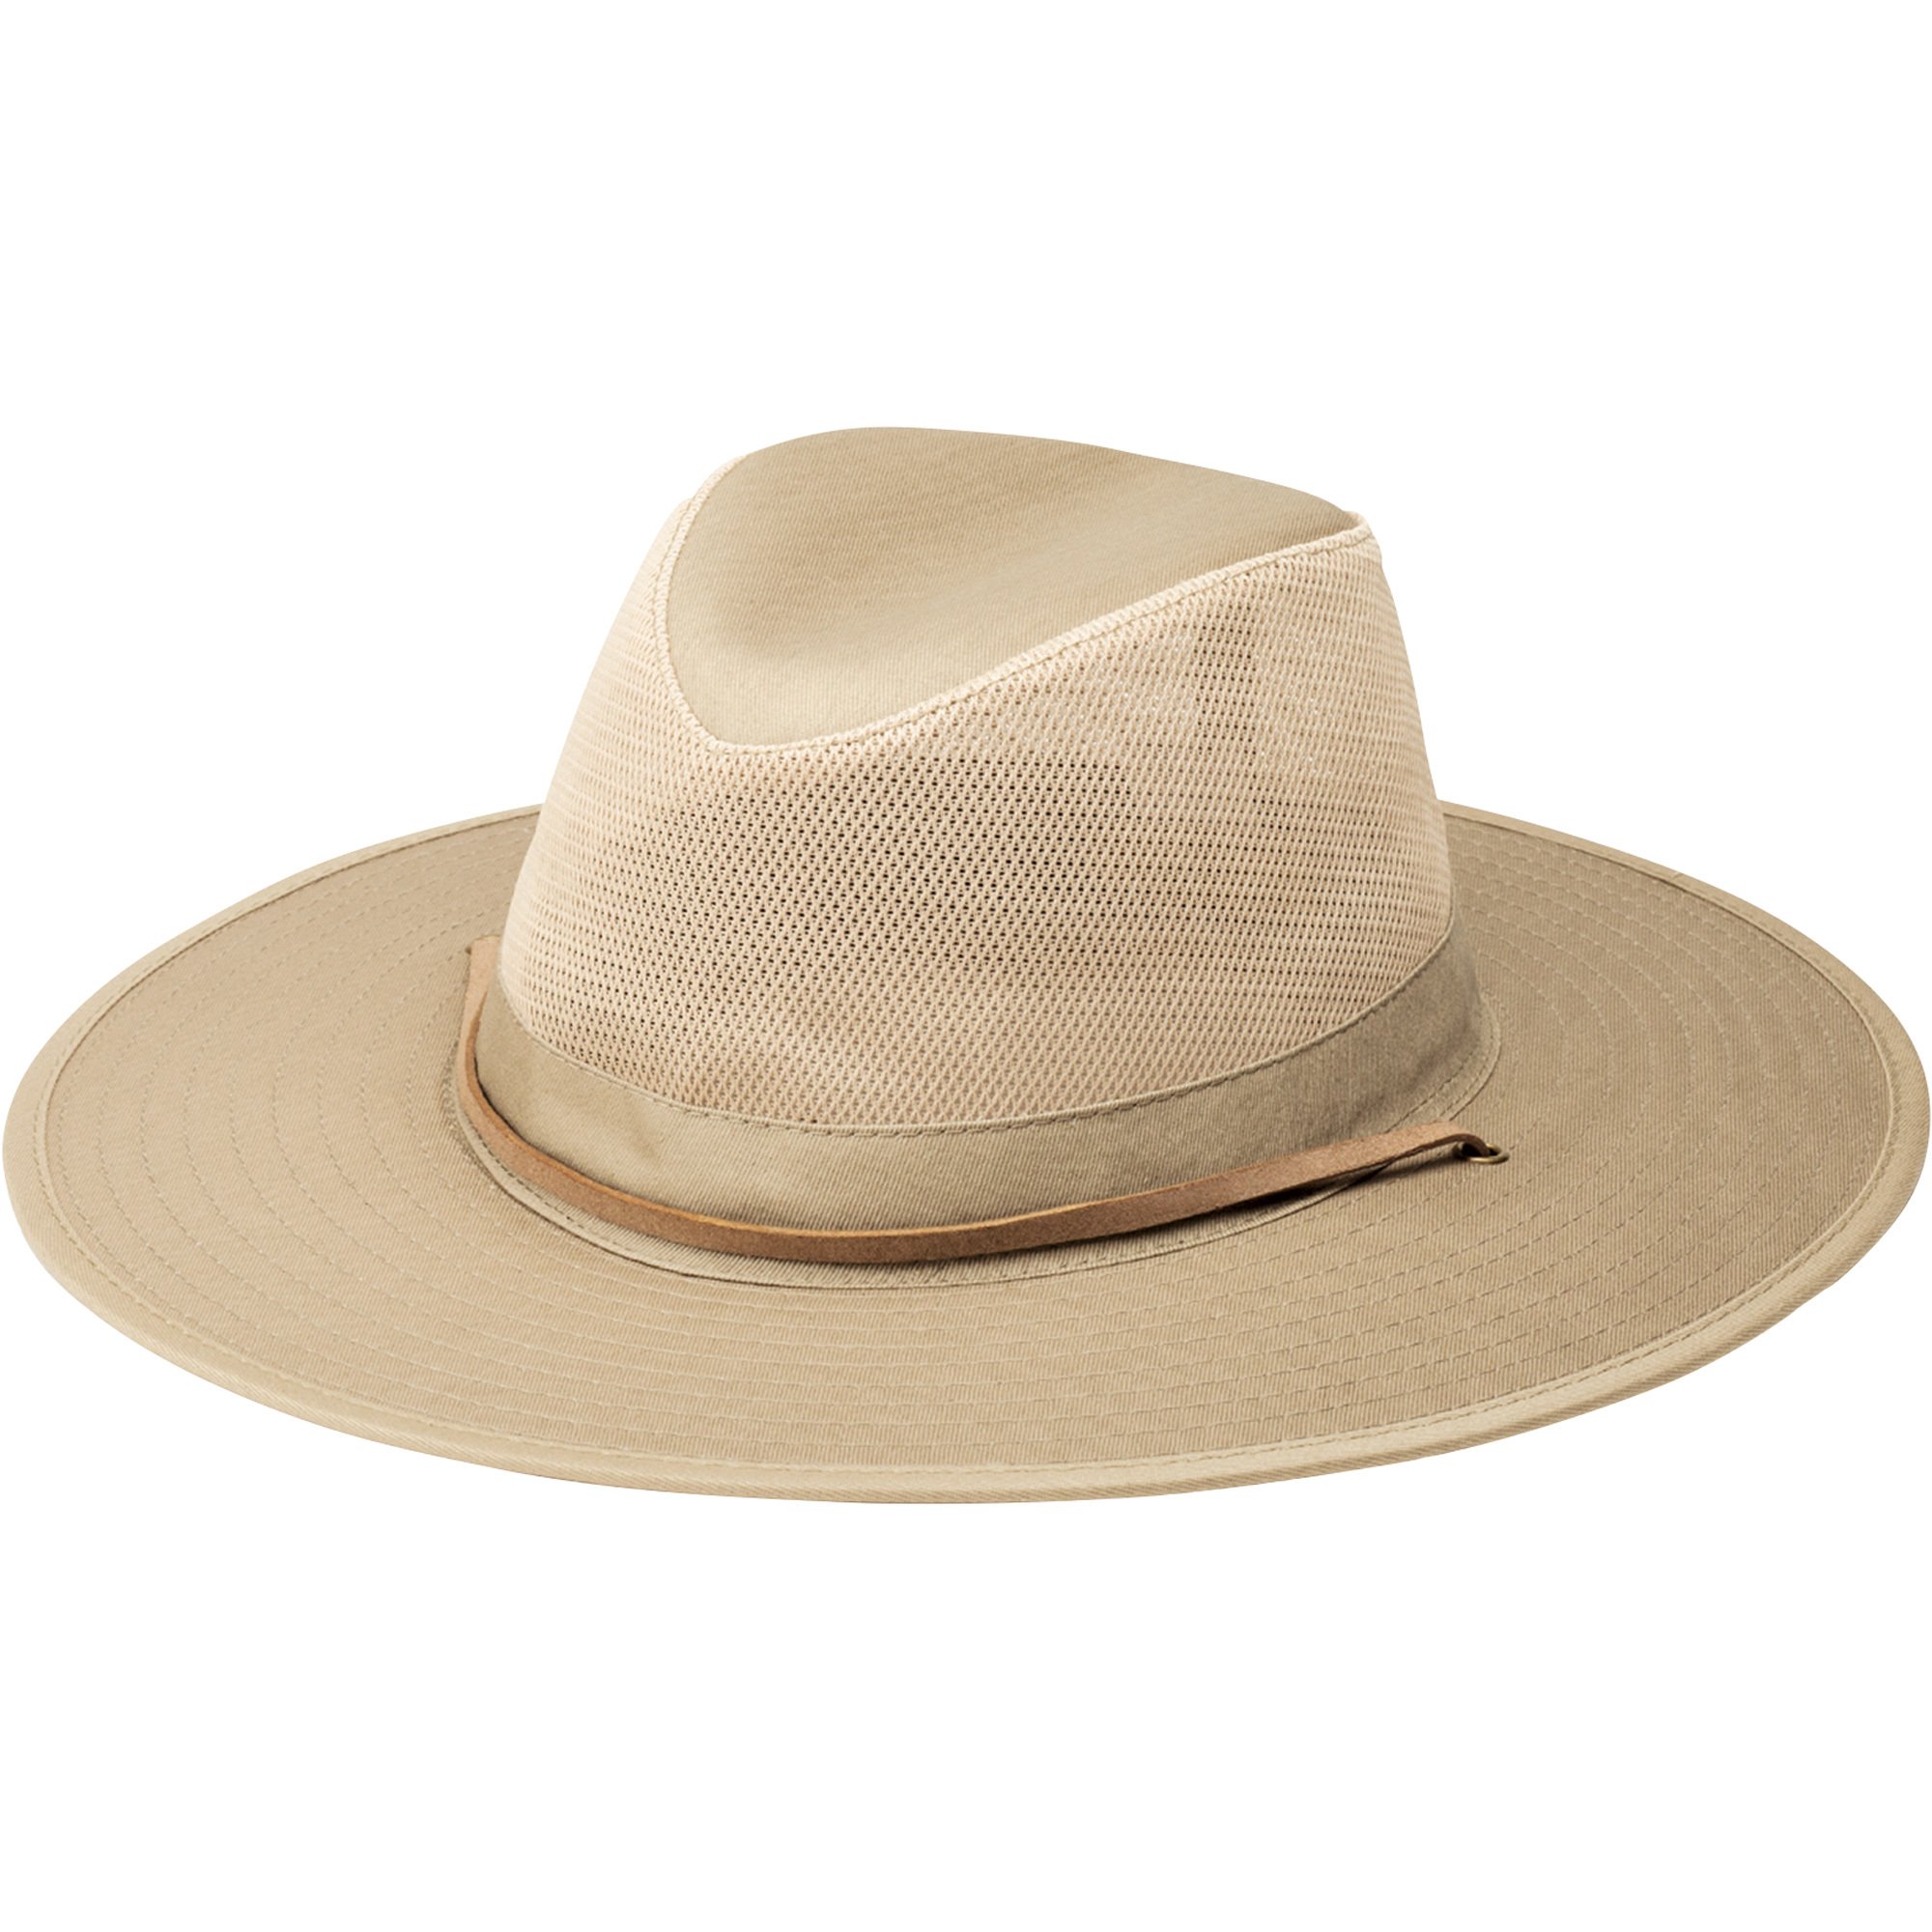 Peter Grimm Men's Stream Outdoor Hat — Sand, One Size Fits Most, Model#  GCR6046-SND-O | Northern Tool